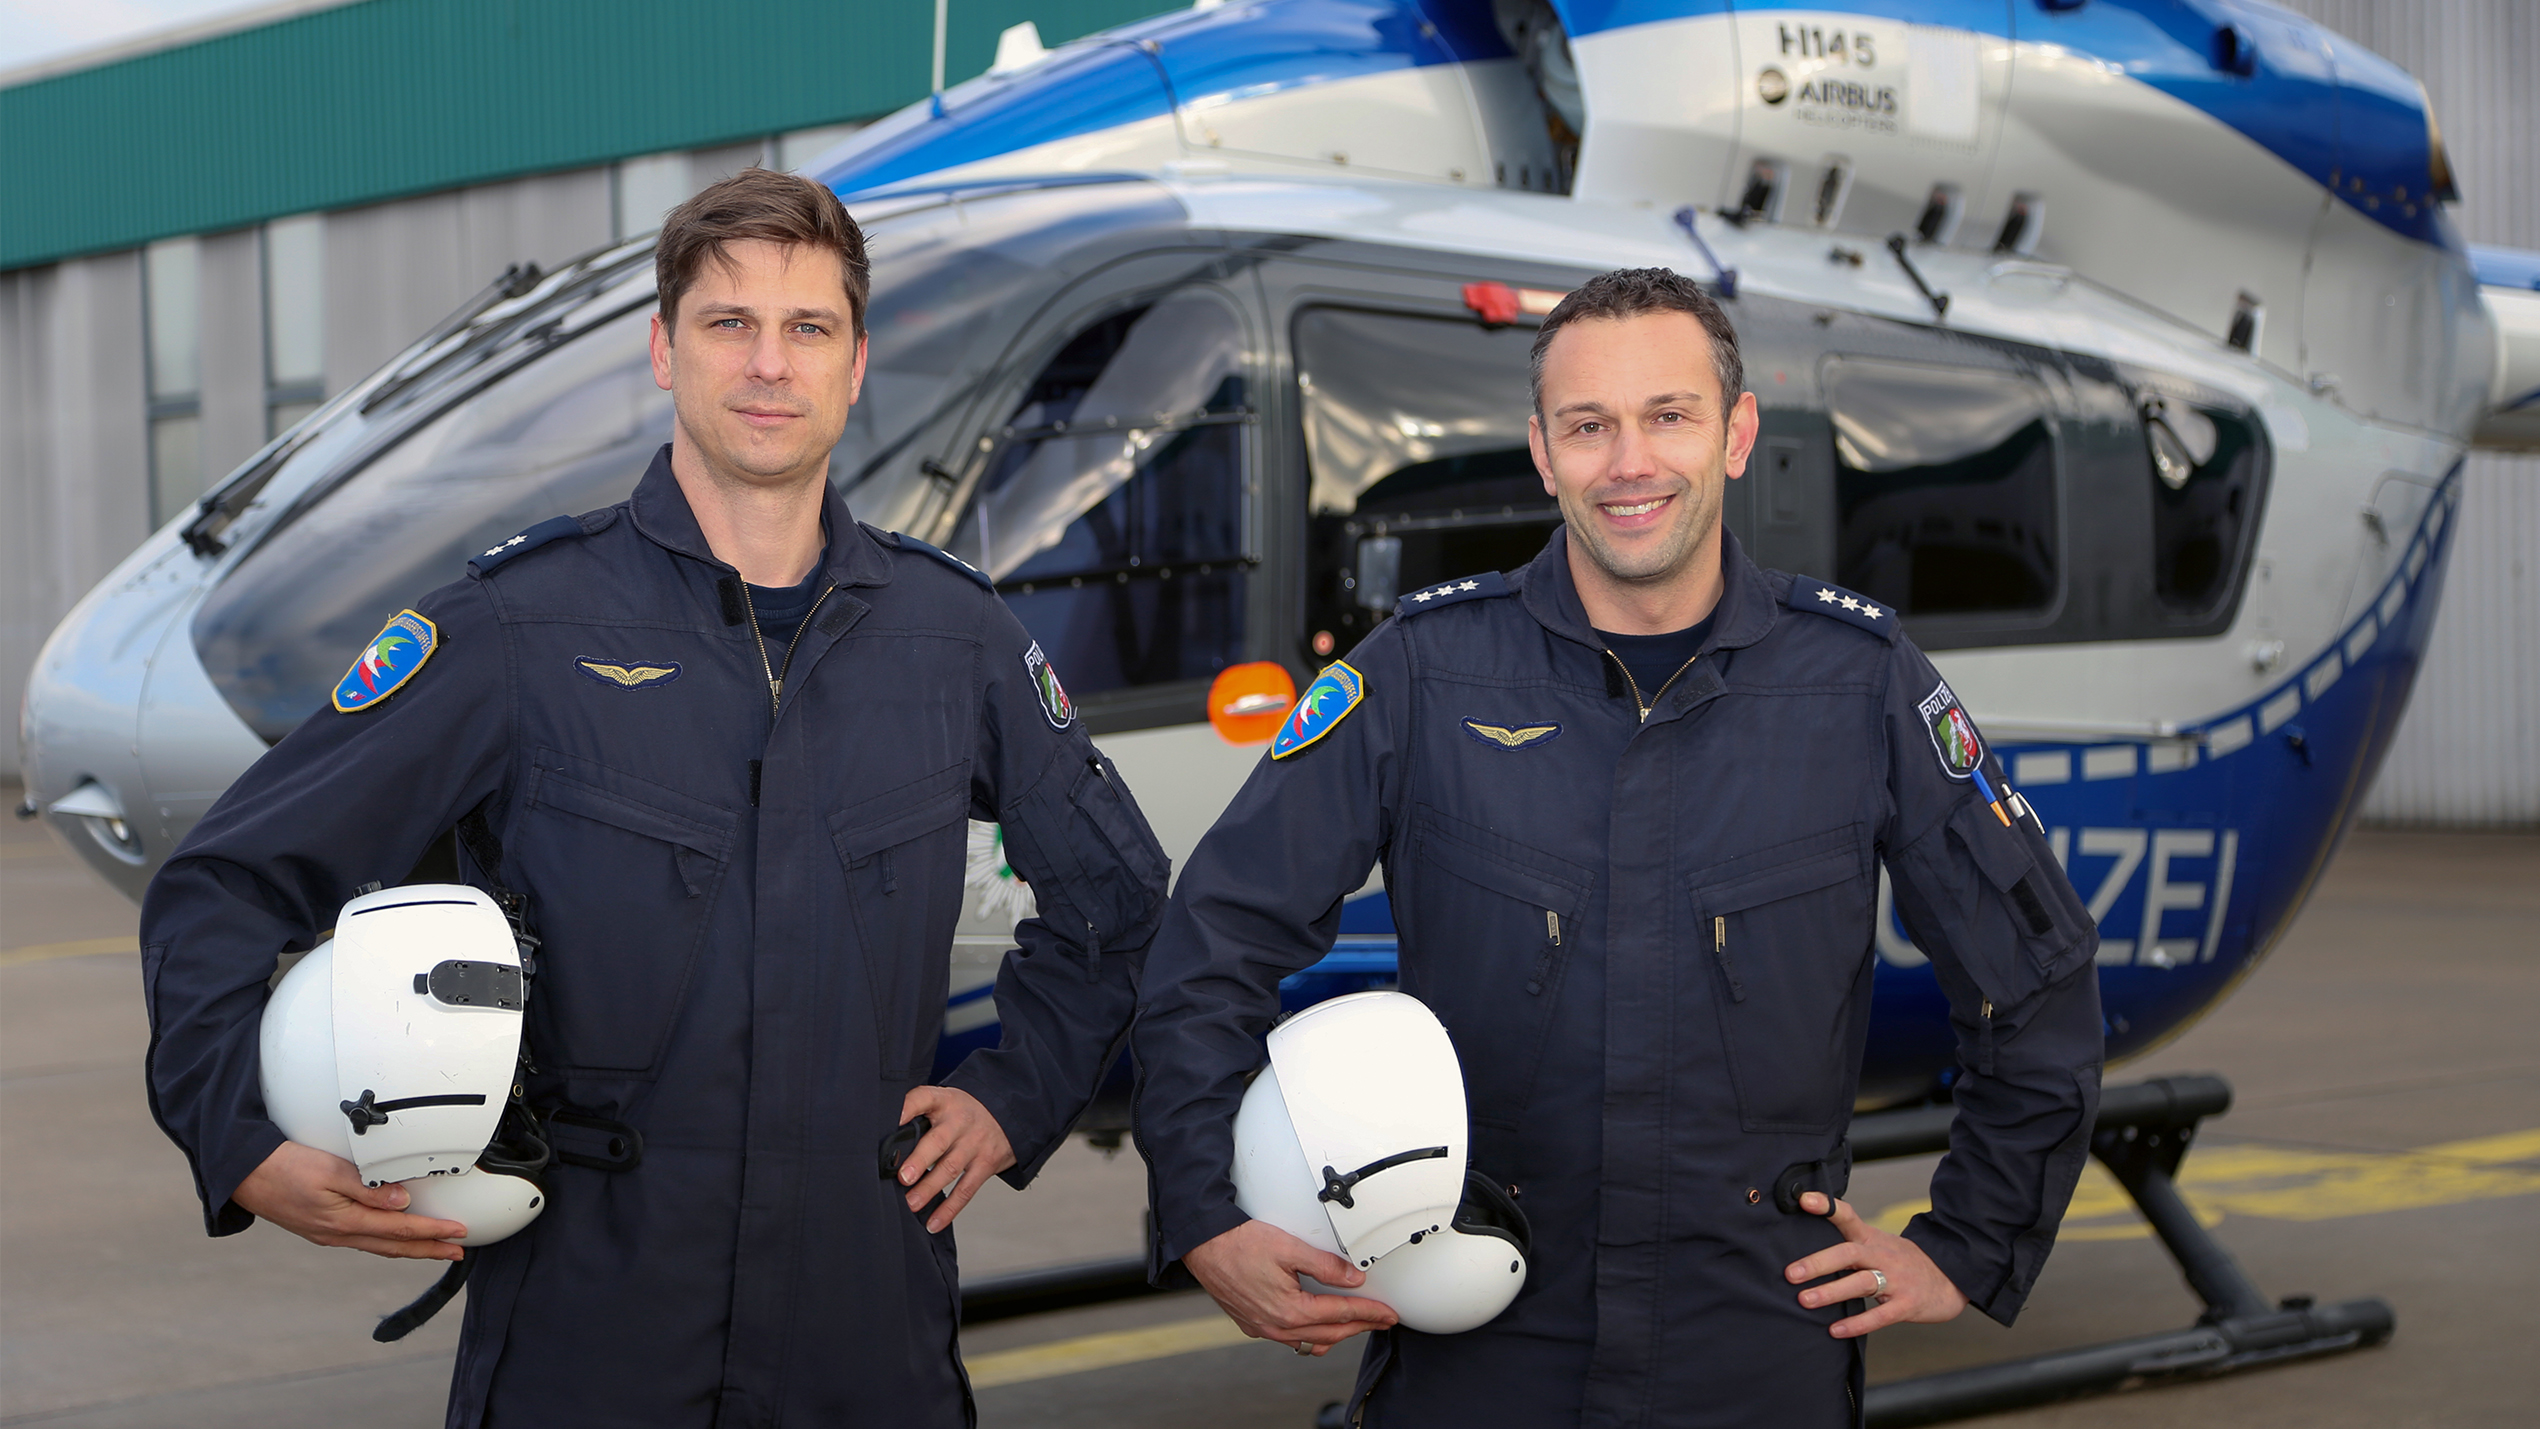 Two pilots in front of a police helicopter